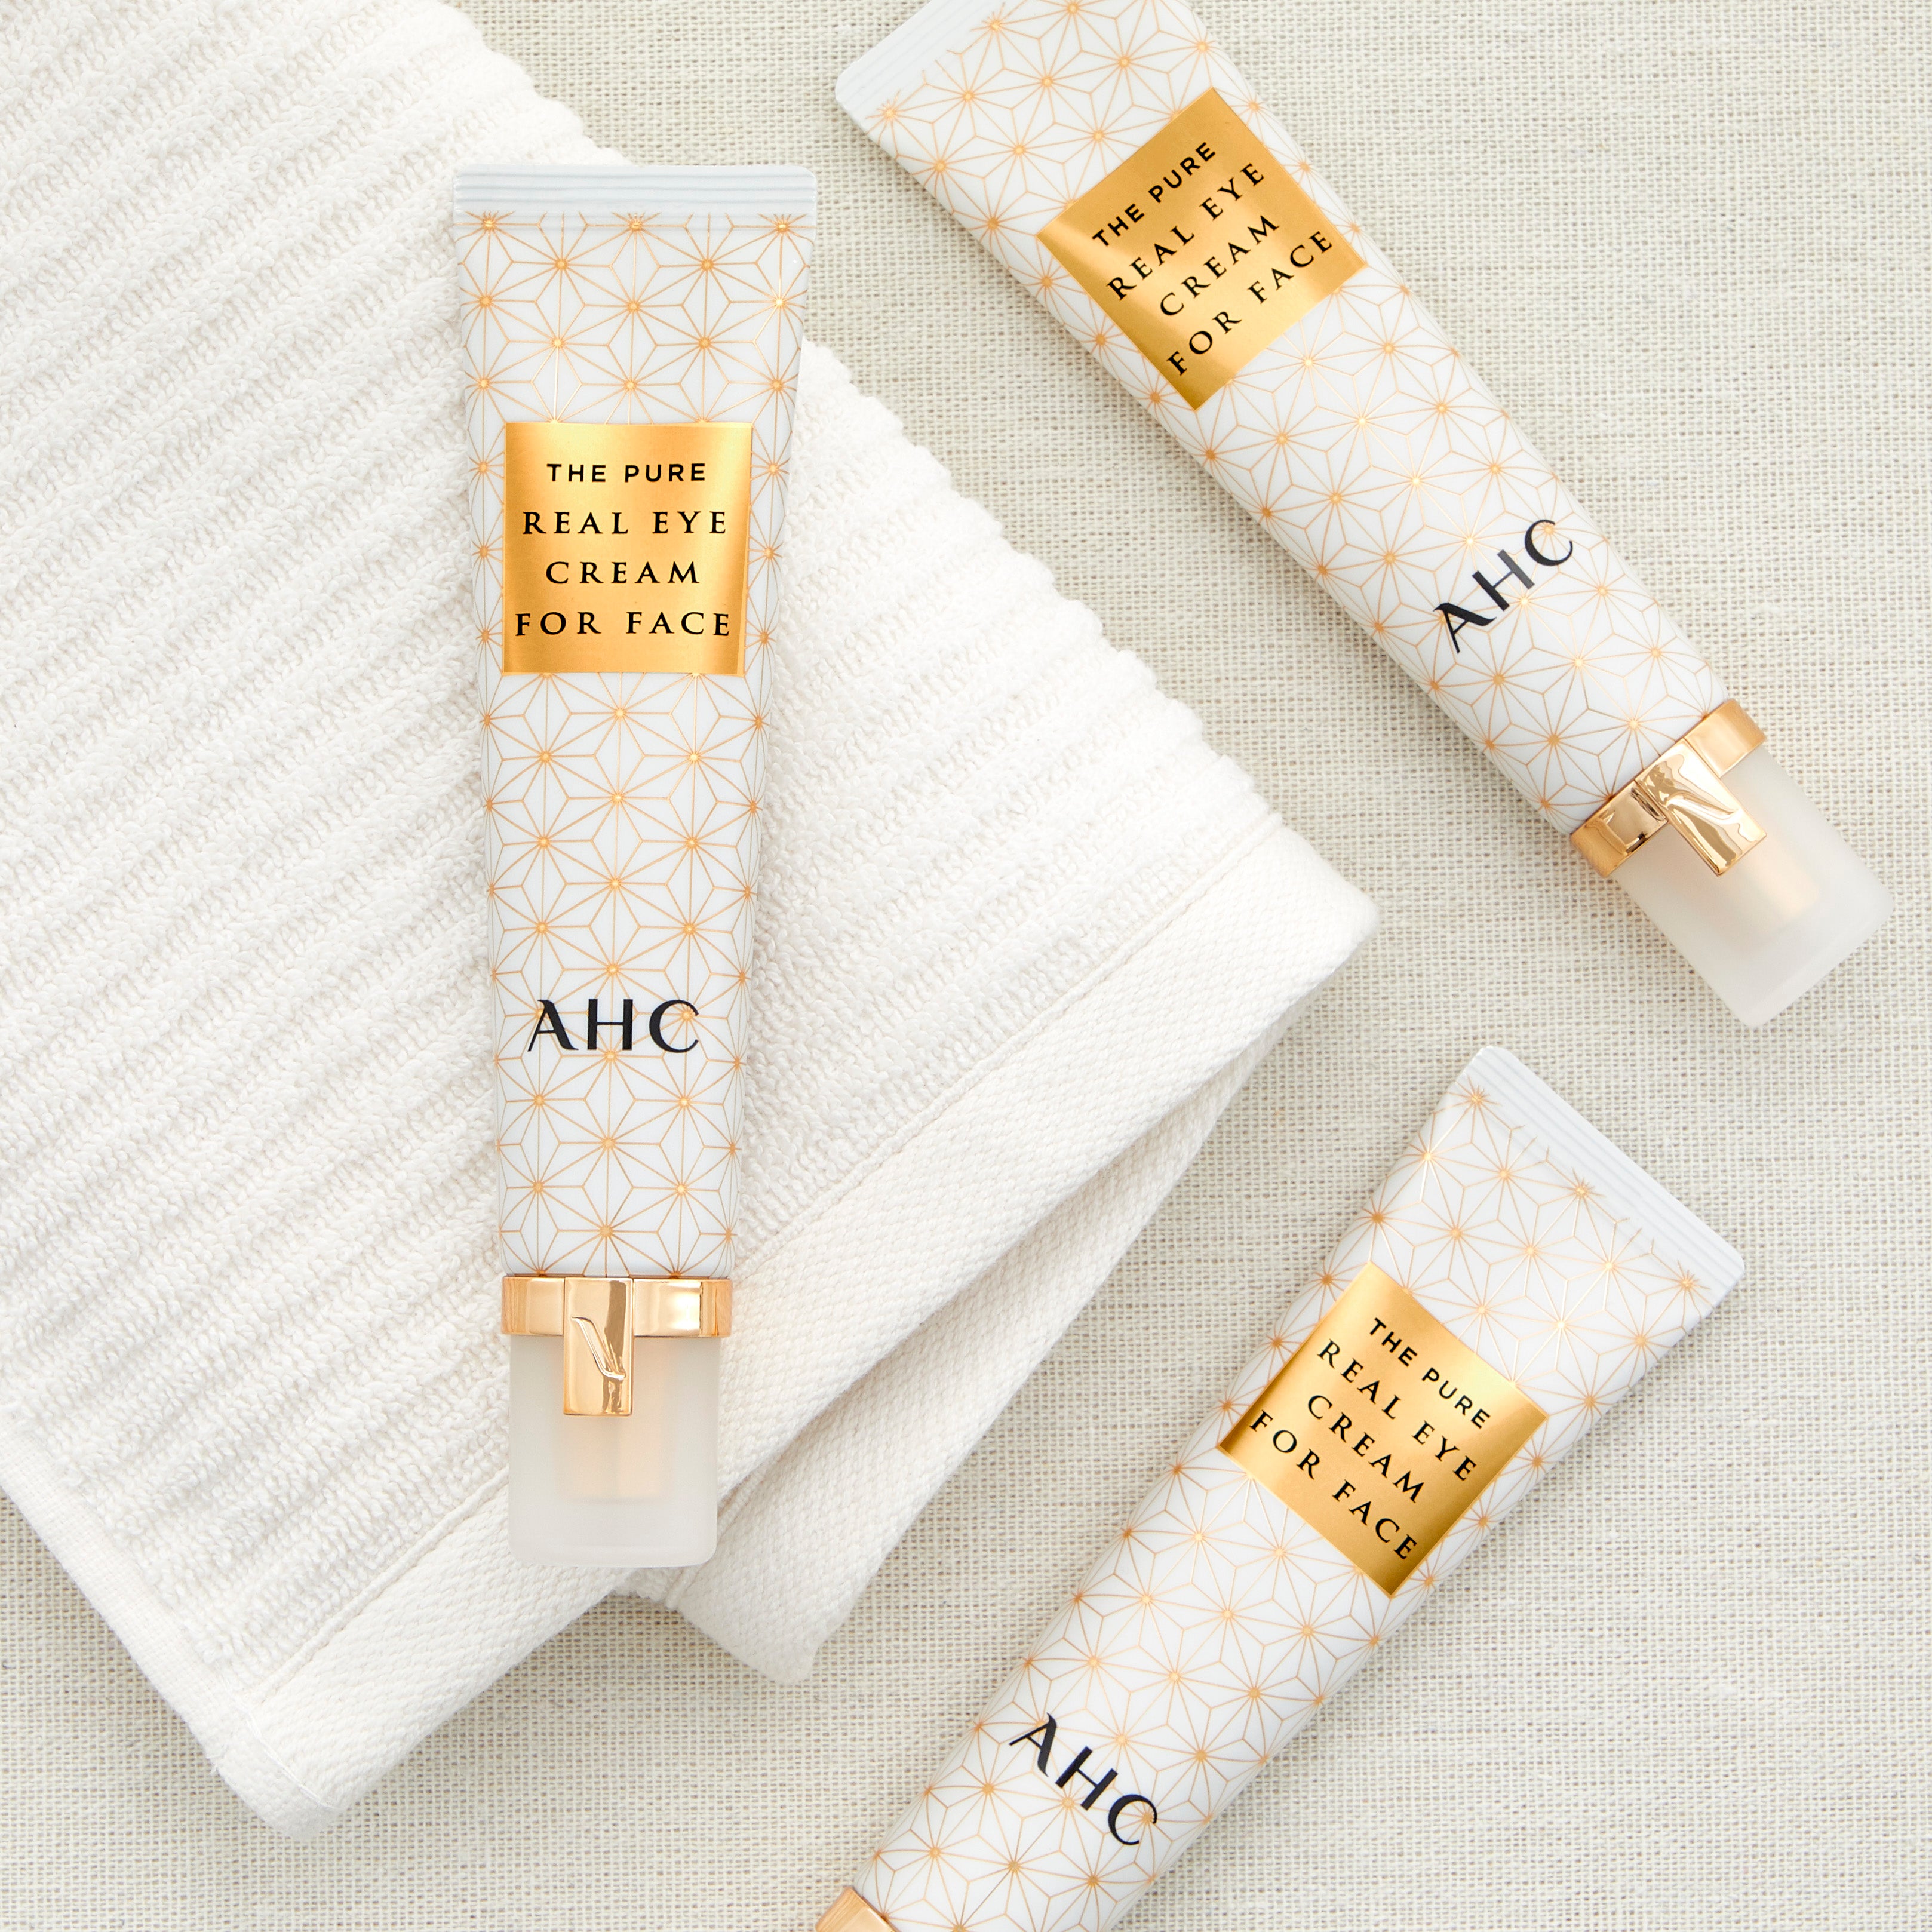 AHC real eye cream for face